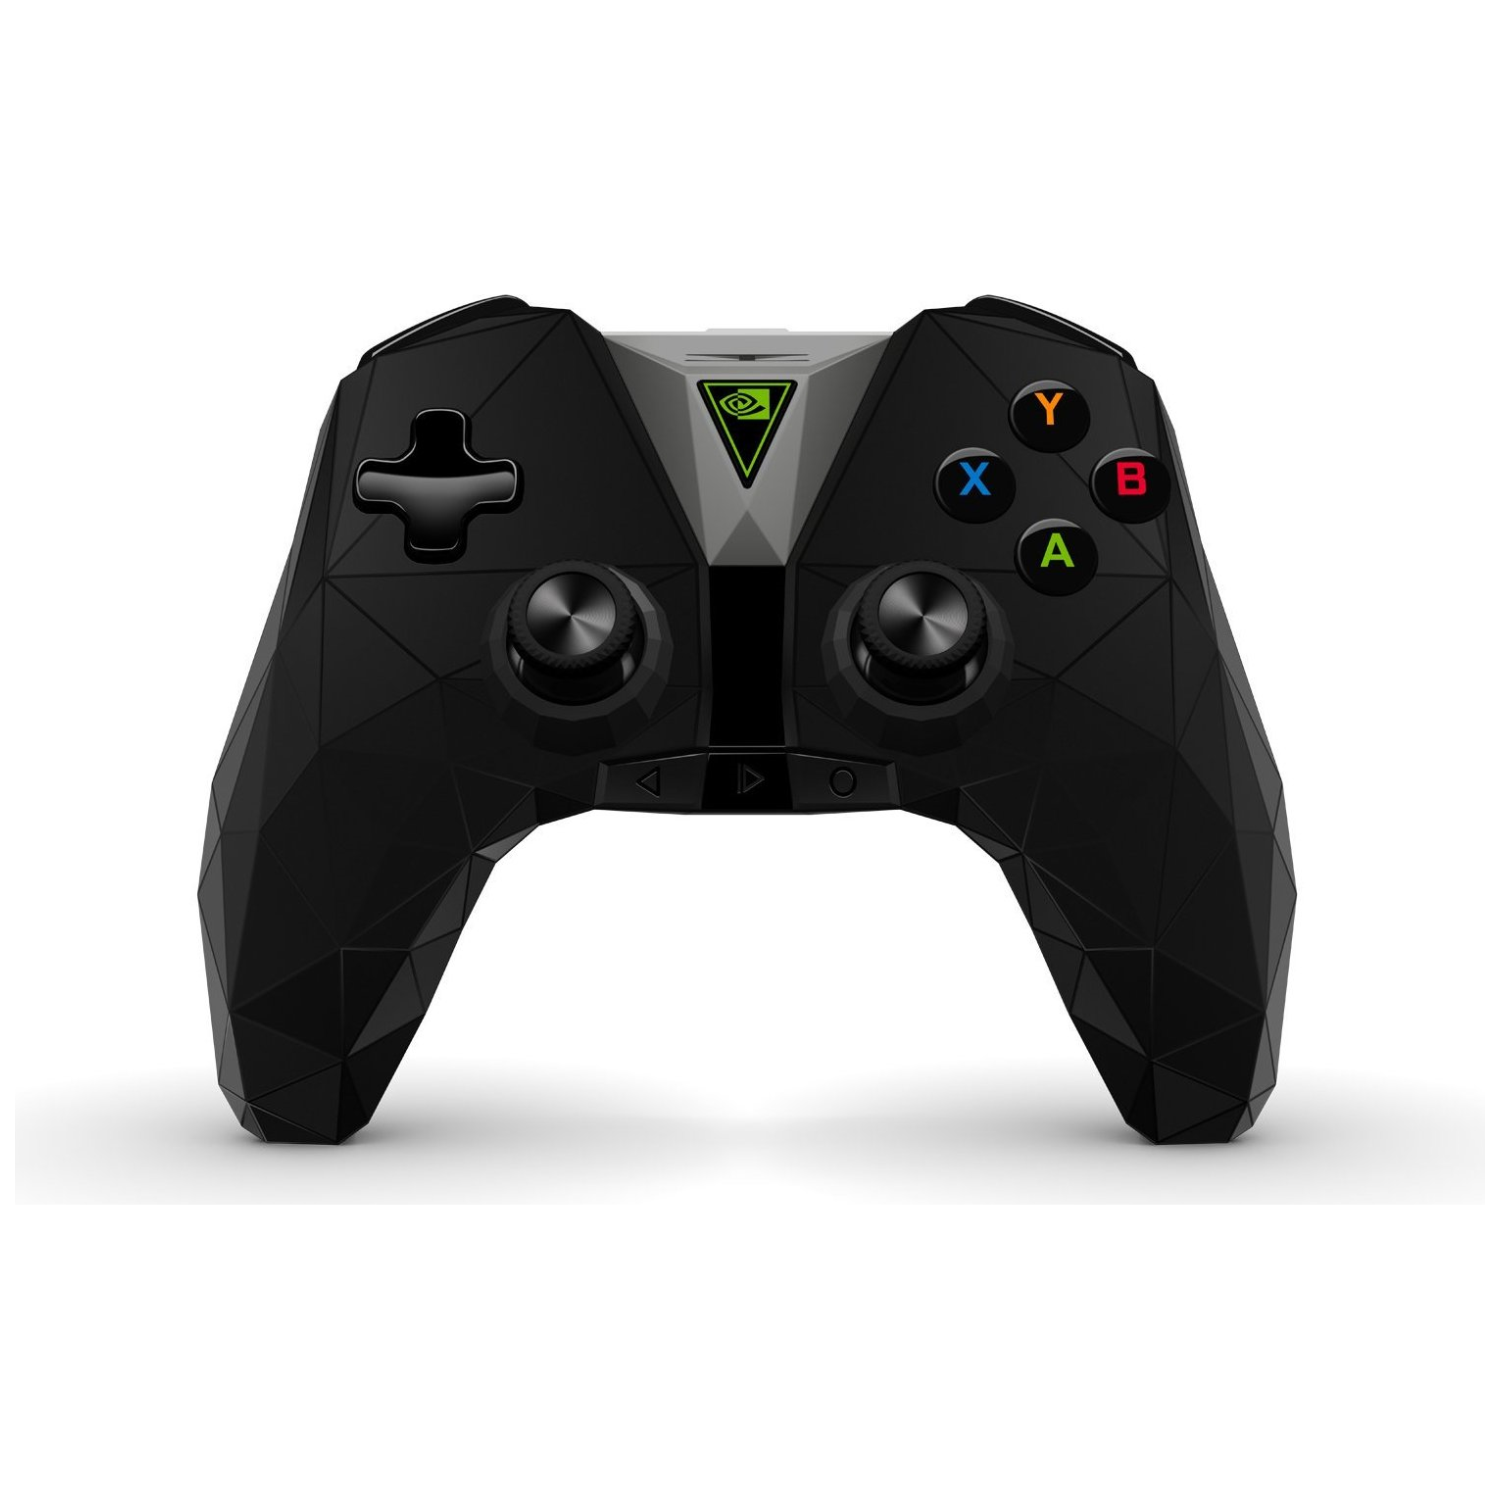 nvidia shield controller not working in game